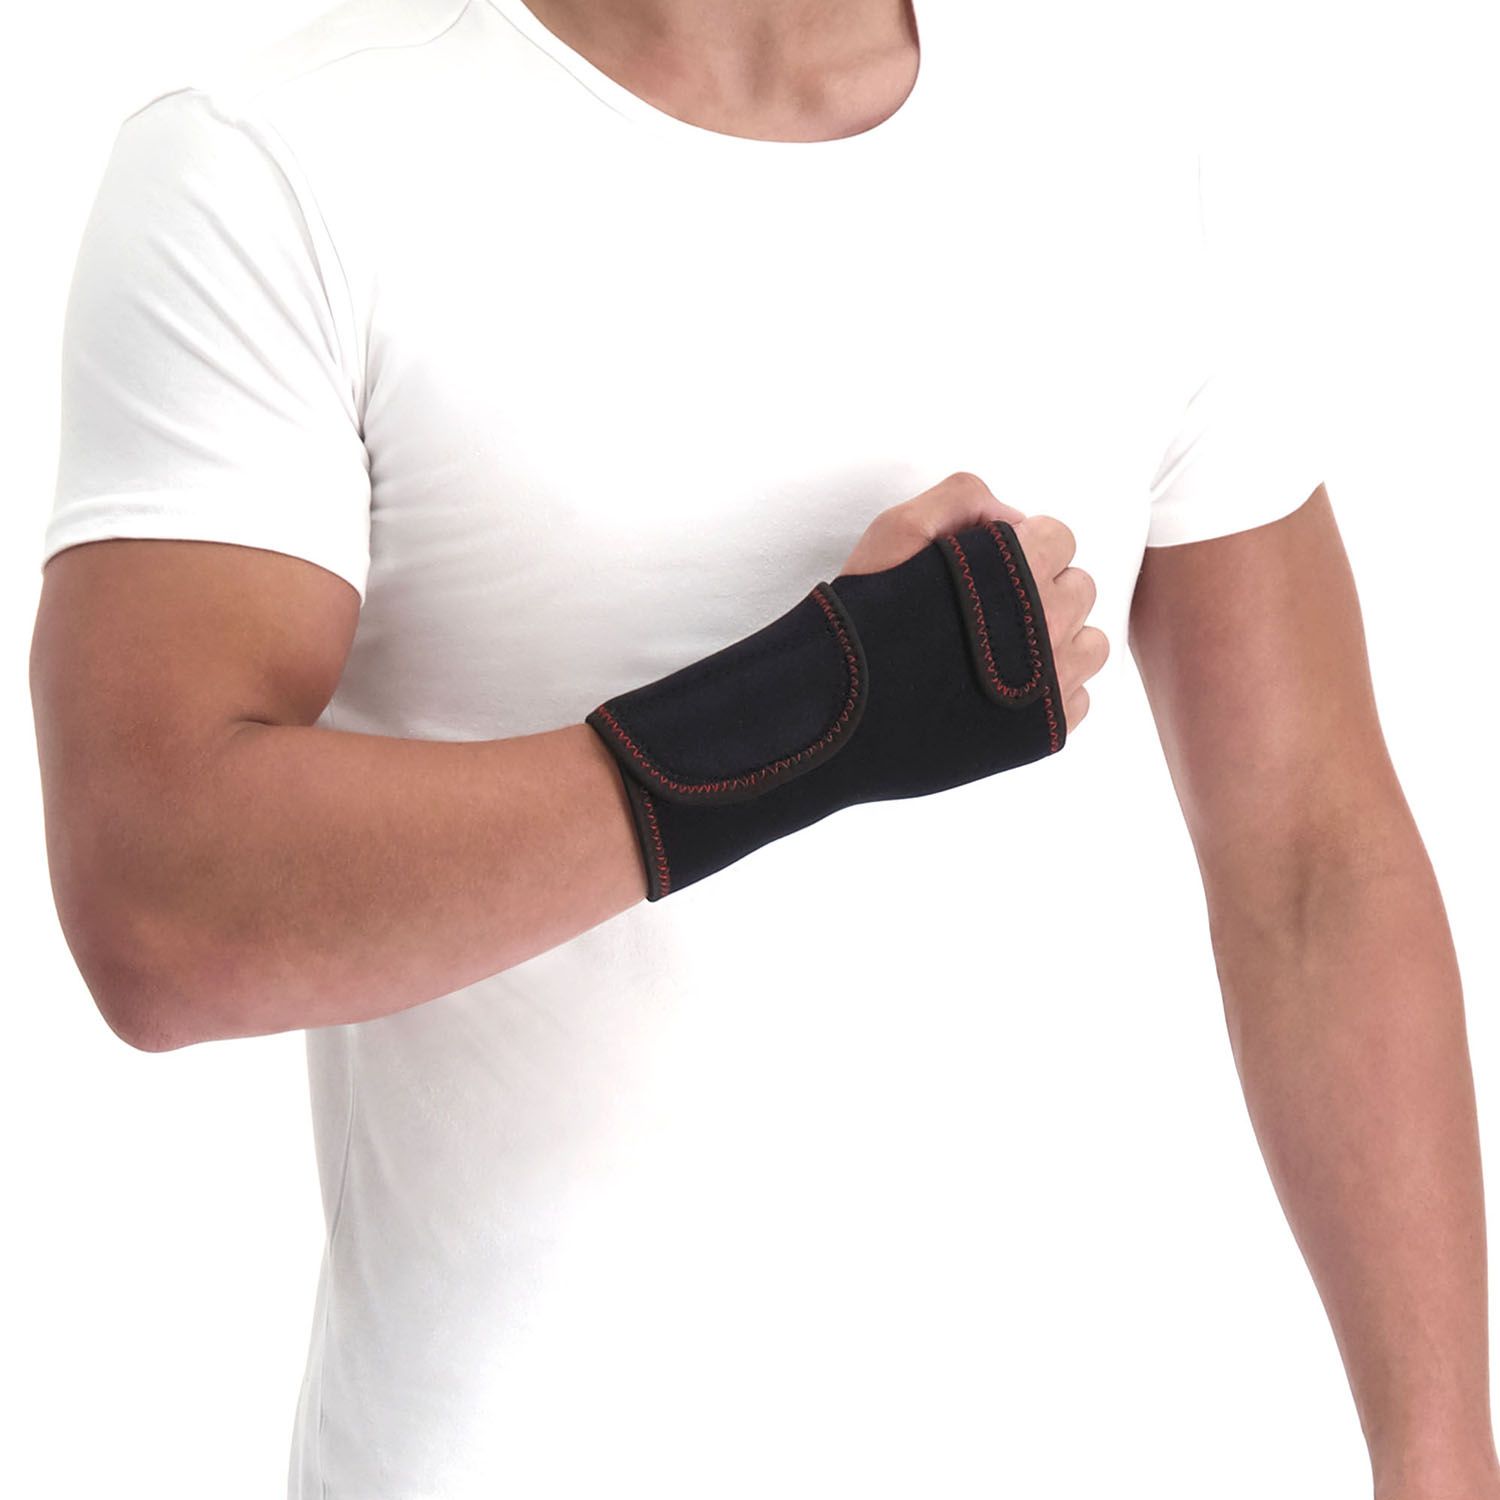 gladiator sports carpal tunnel syndrome wrist support worn by model